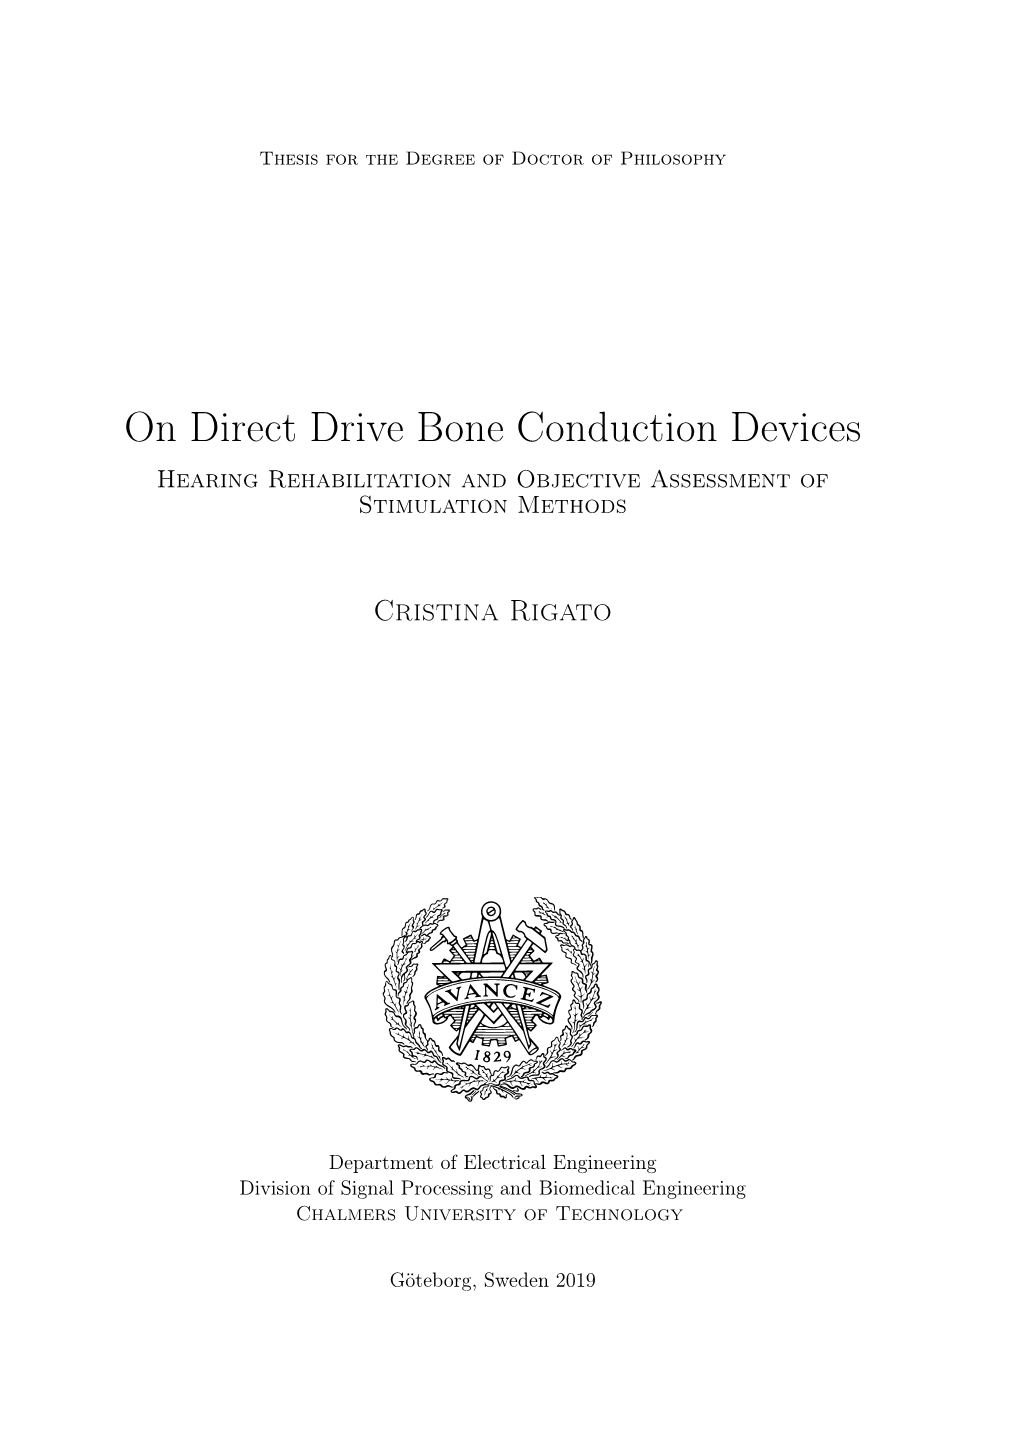 On Direct Drive Bone Conduction Devices Hearing Rehabilitation and Objective Assessment of Stimulation Methods